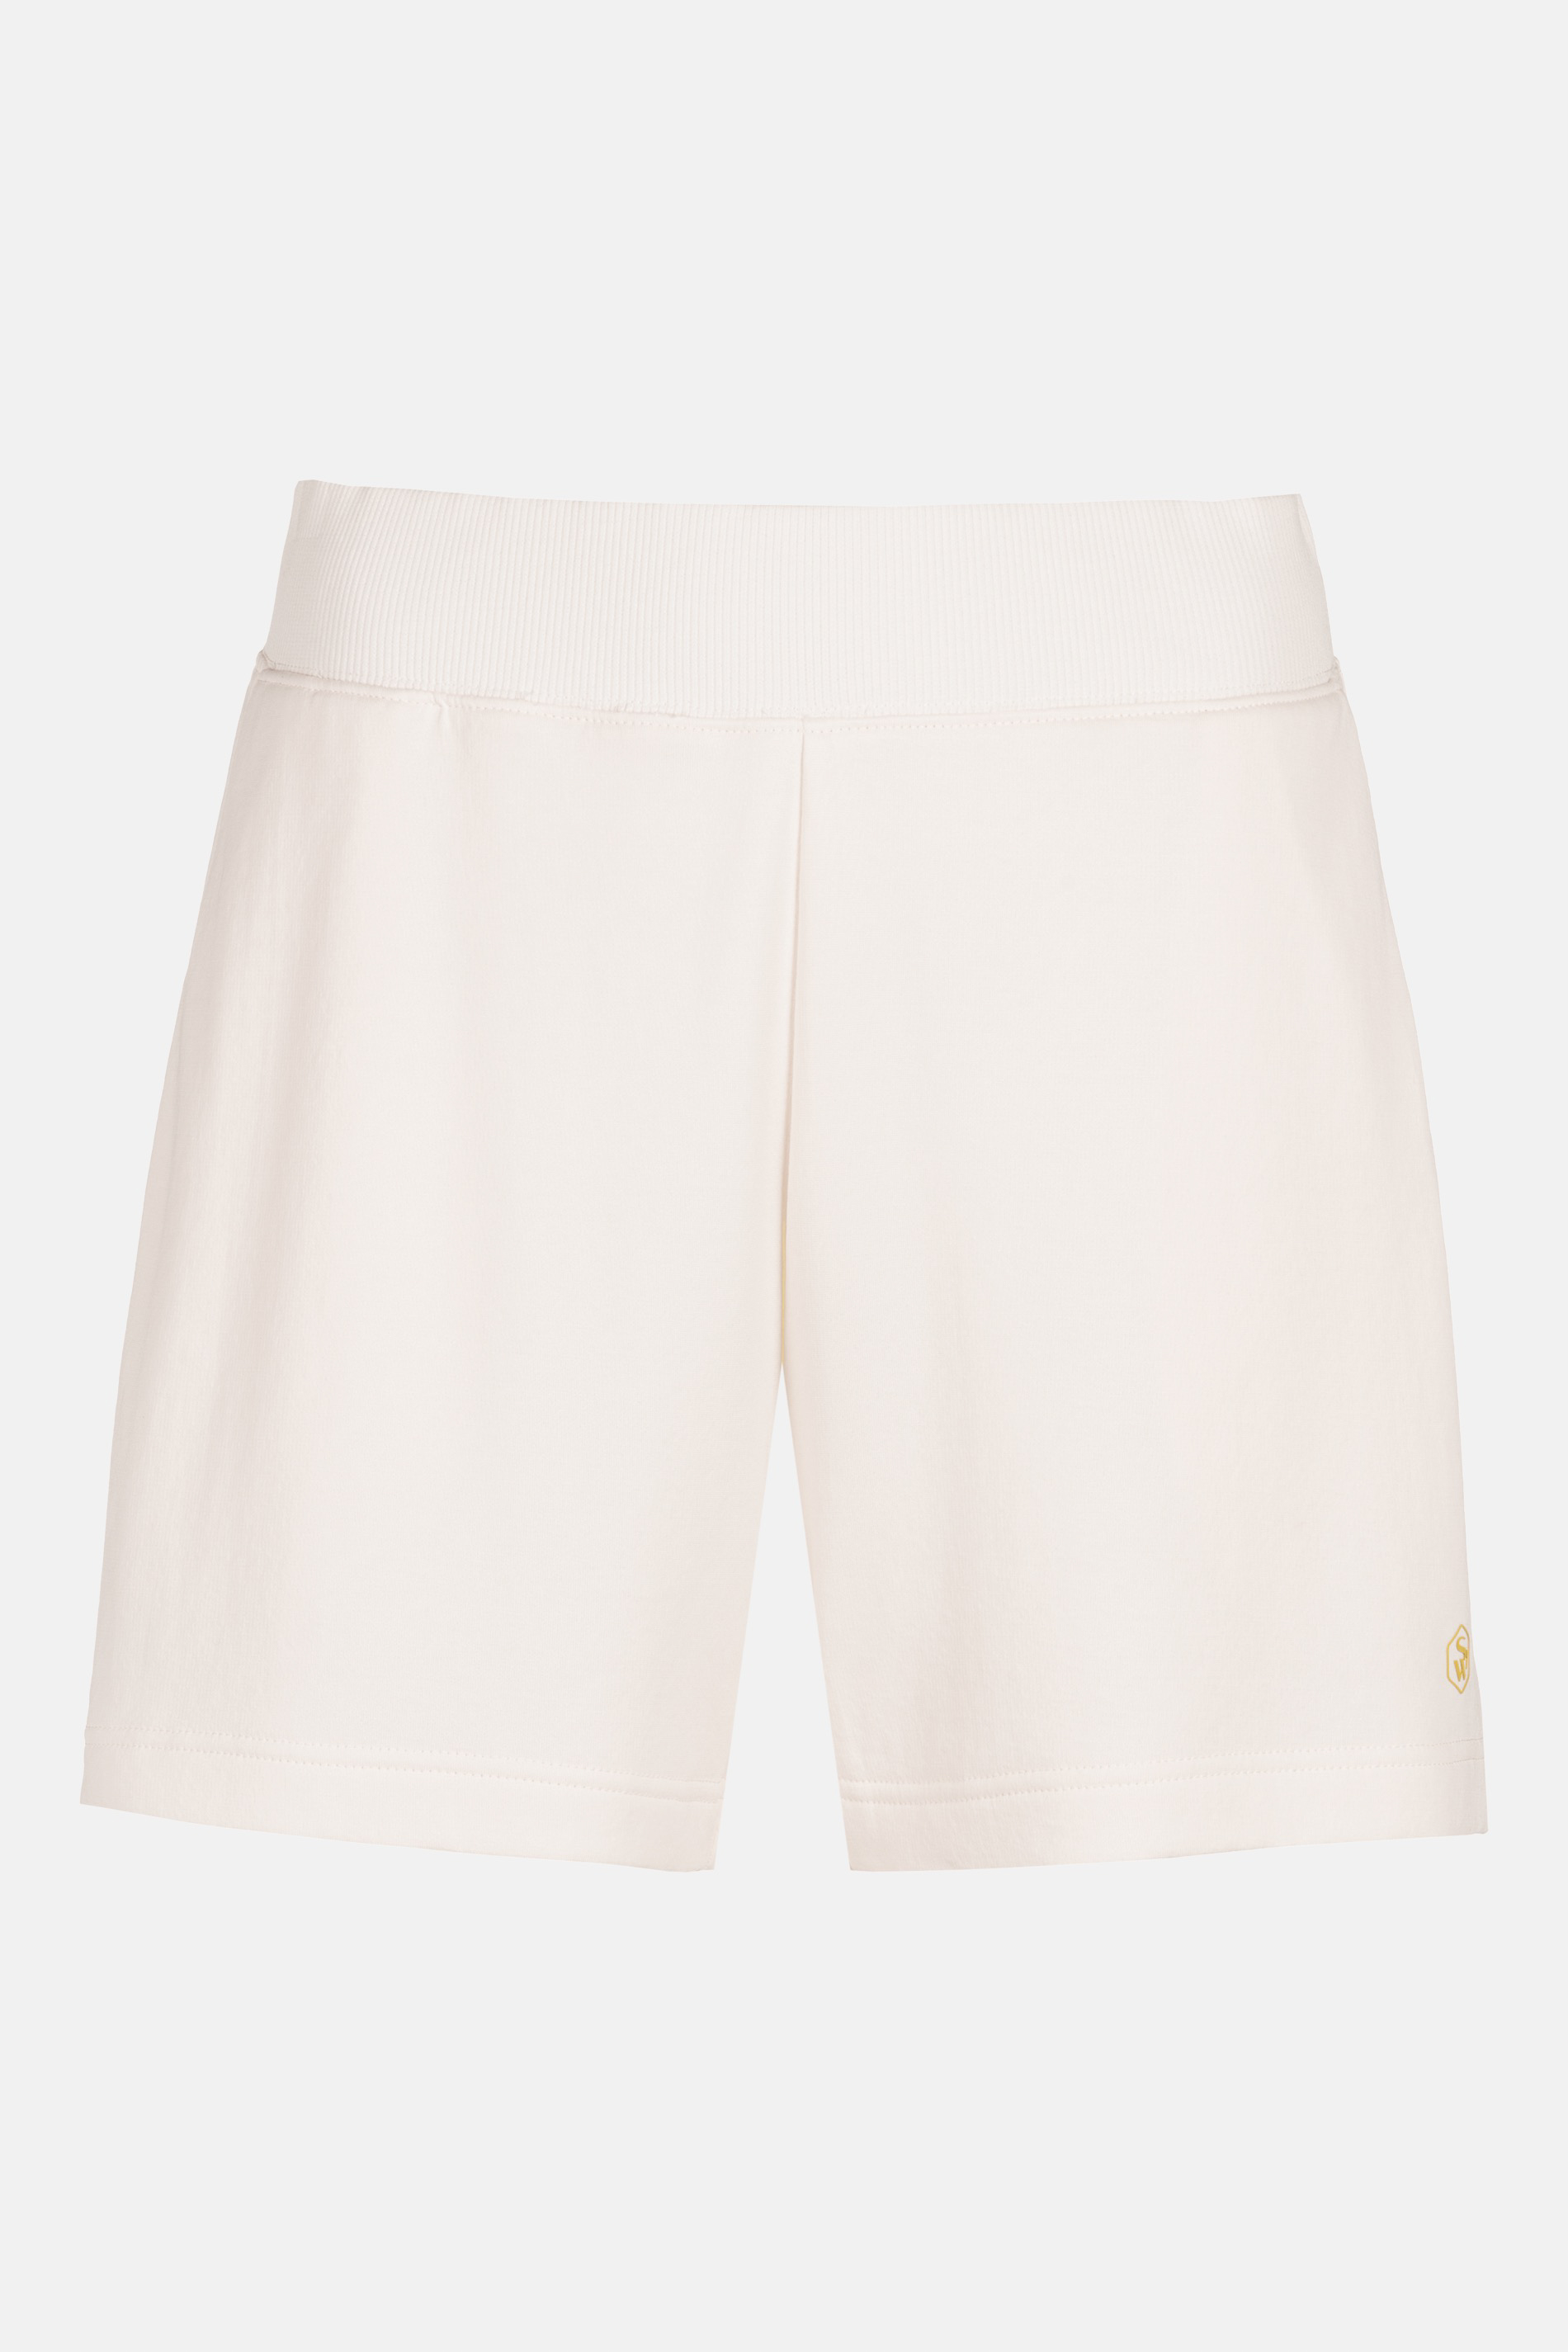 Shorts Serie Cozy Uitknippen | mey®